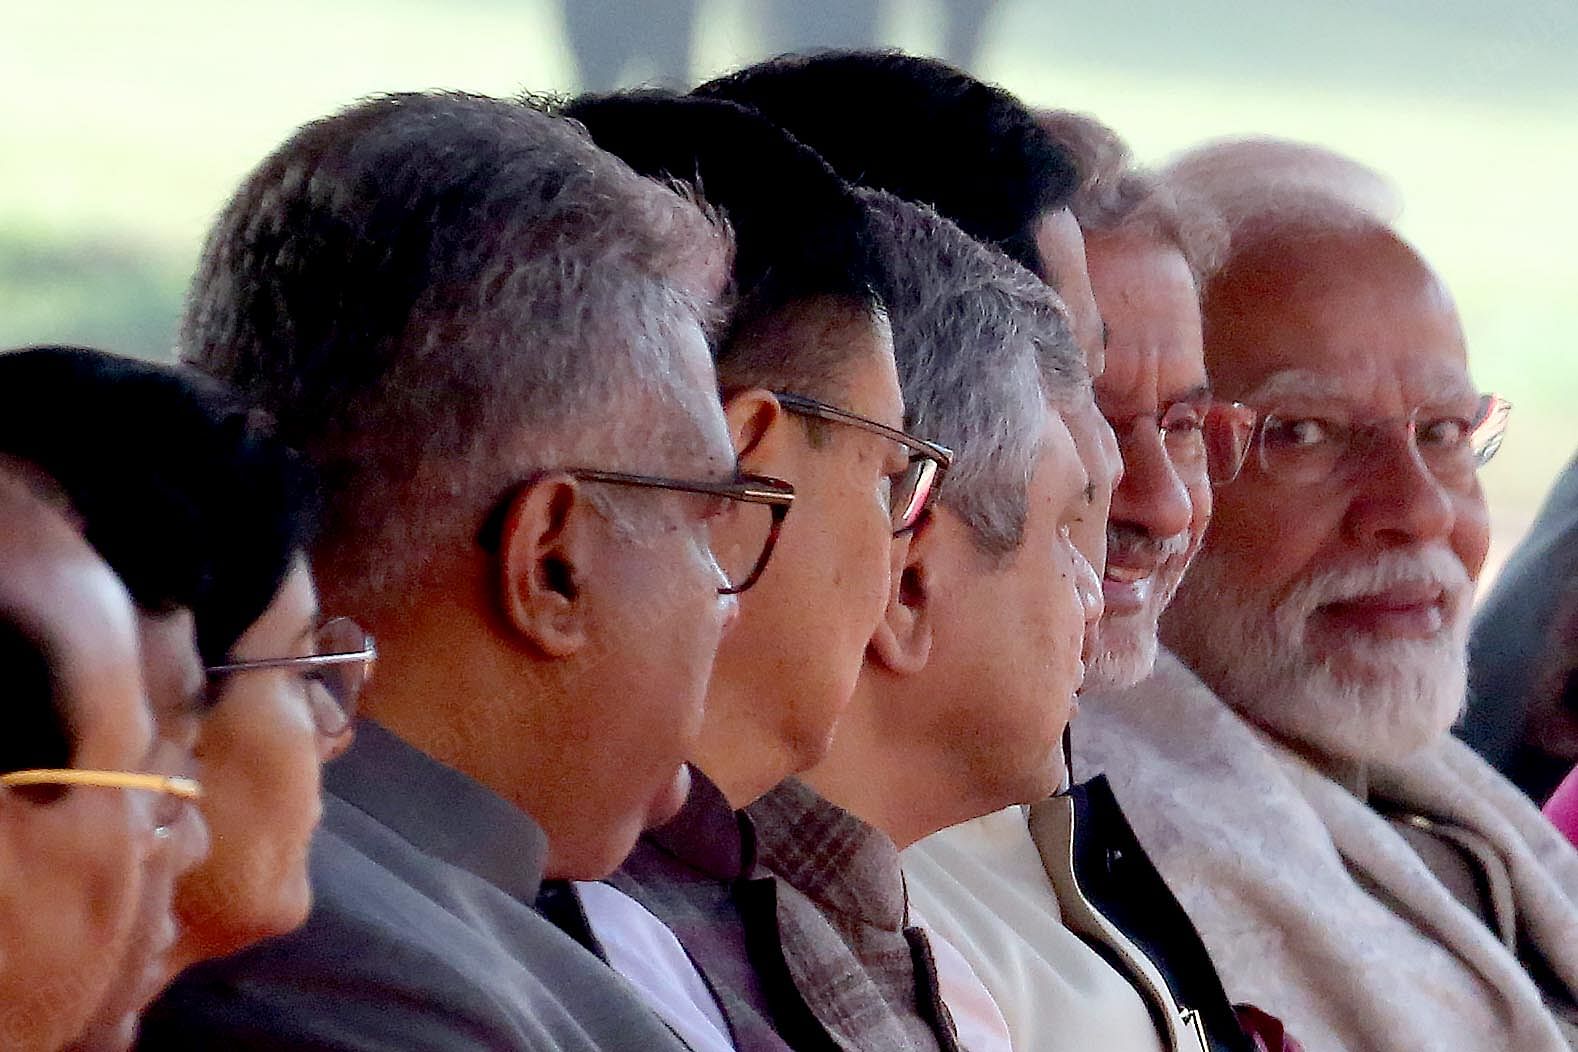 Prime Minister Narendra Modi with his cabinet colleagues ahead of ceremonial welcome at Rashtrapati Bhavan | Praveen Jain | ThePrint